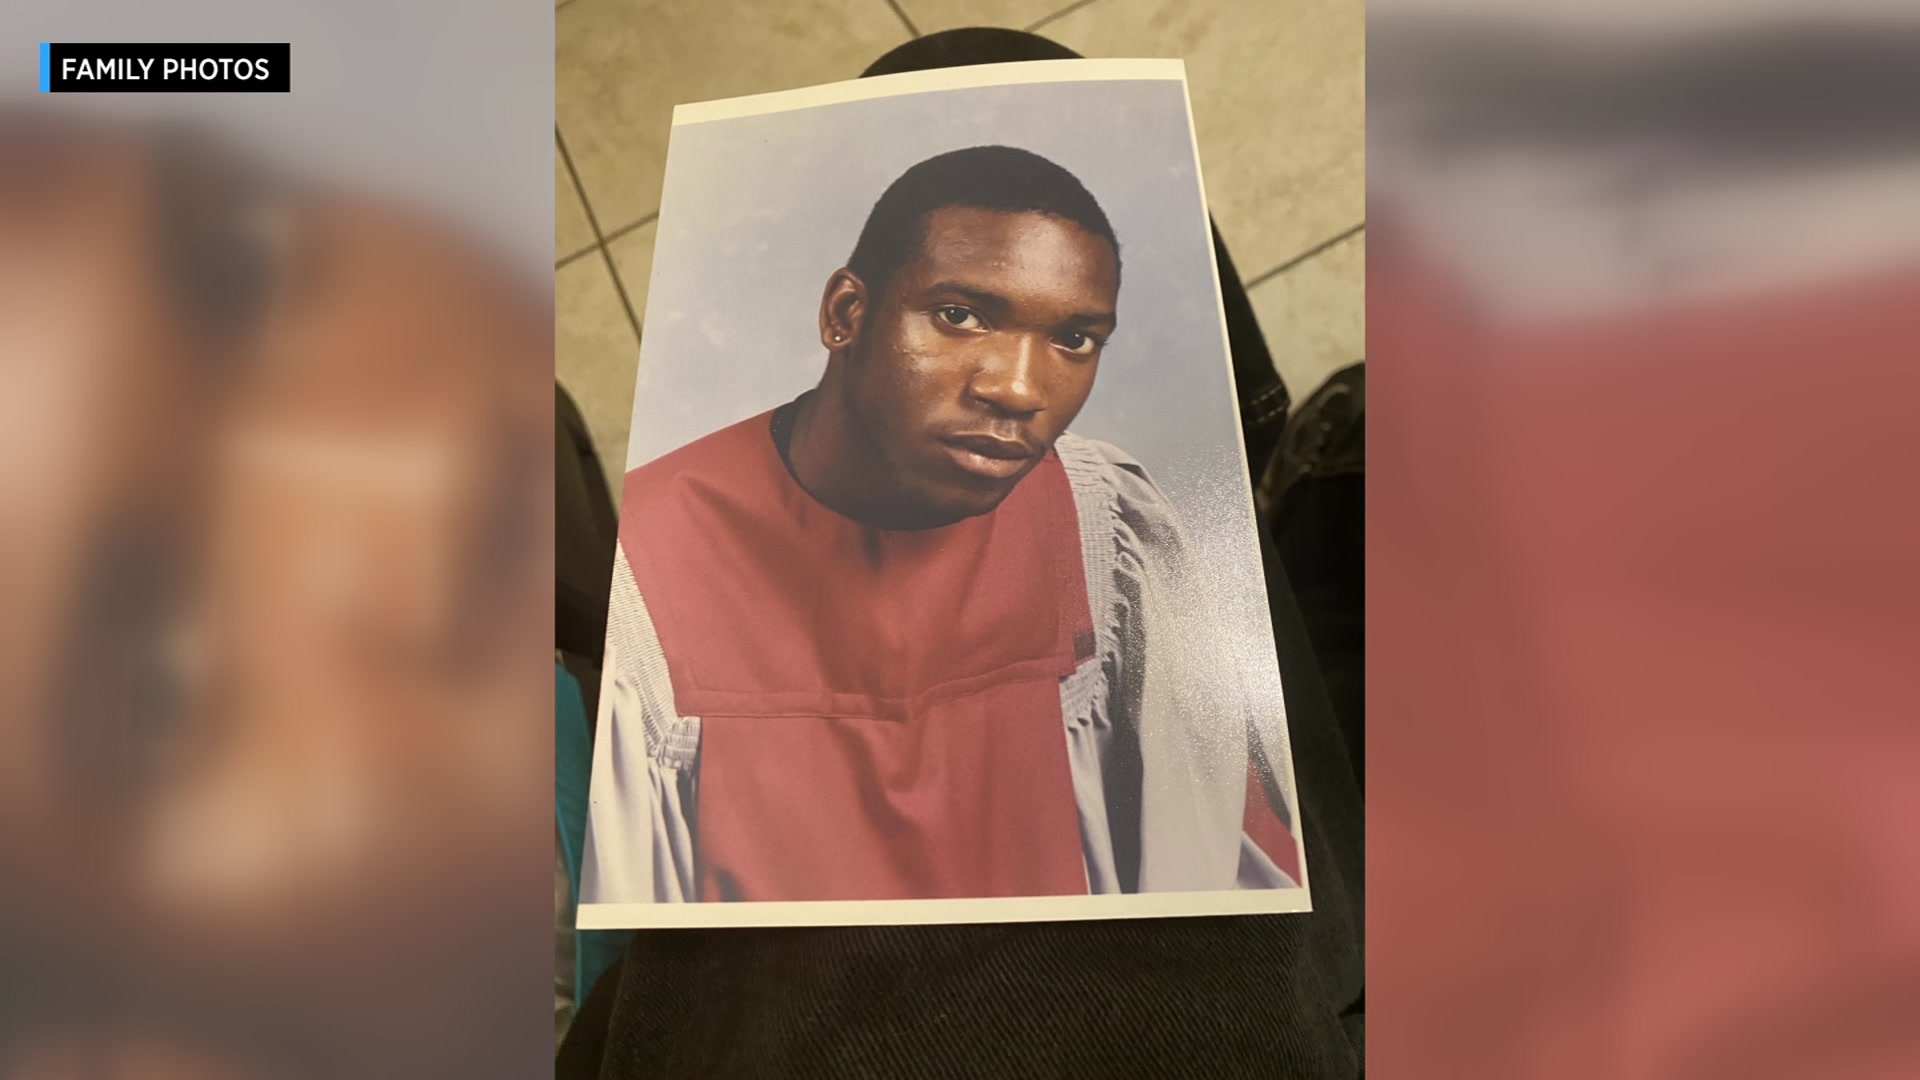 Family Of Man Shot, Killed By Miami Police Files Wrongful Death Lawsuit